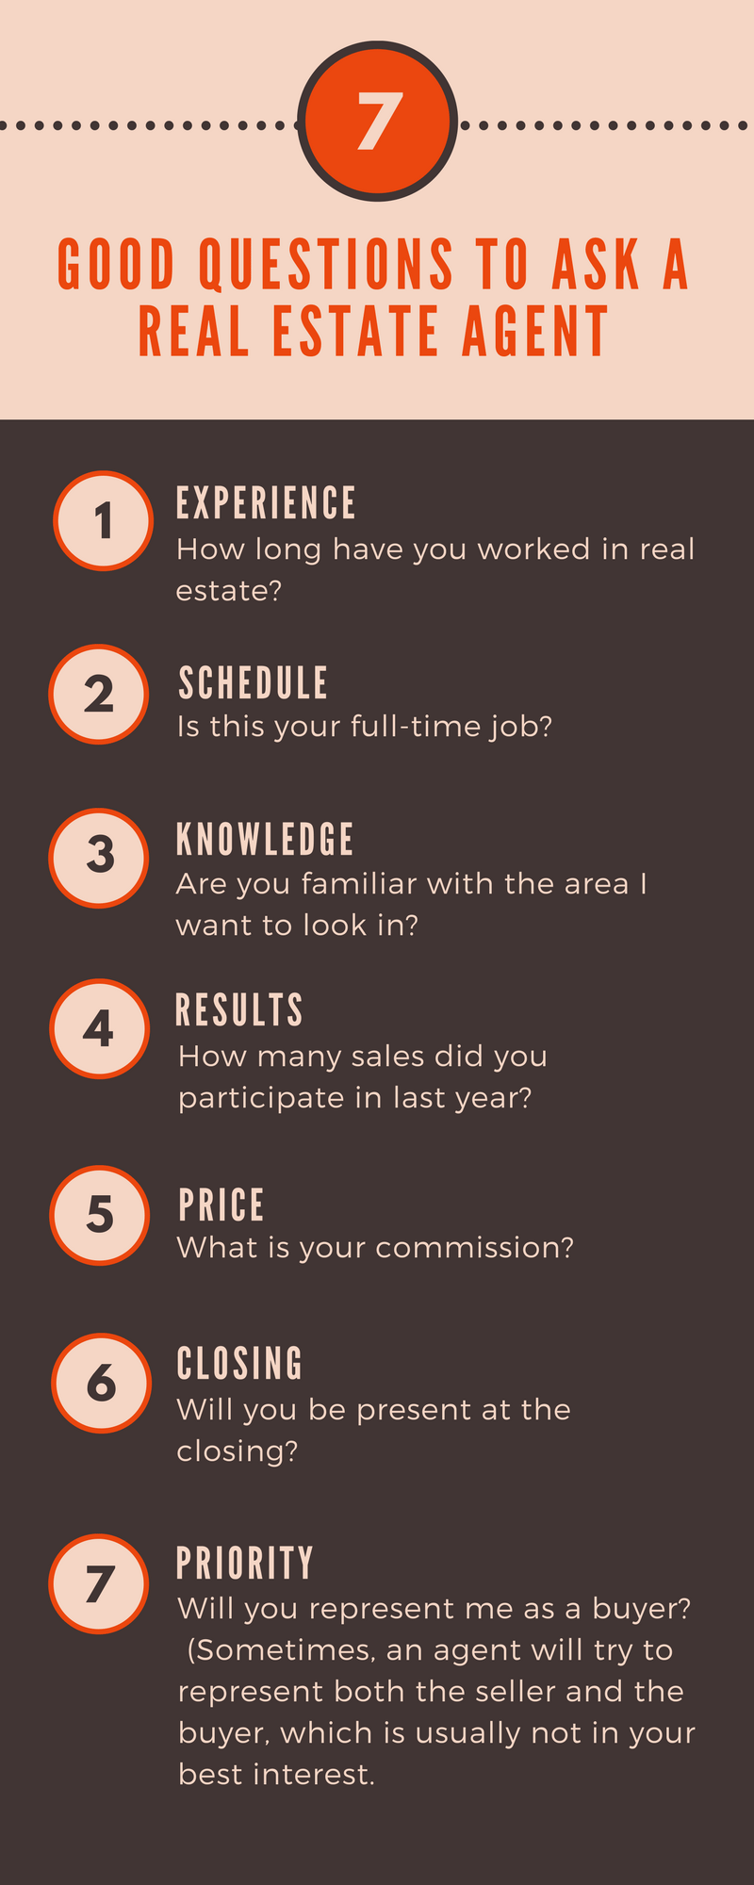 7 Good Questions to Ask a Real Estate Agent